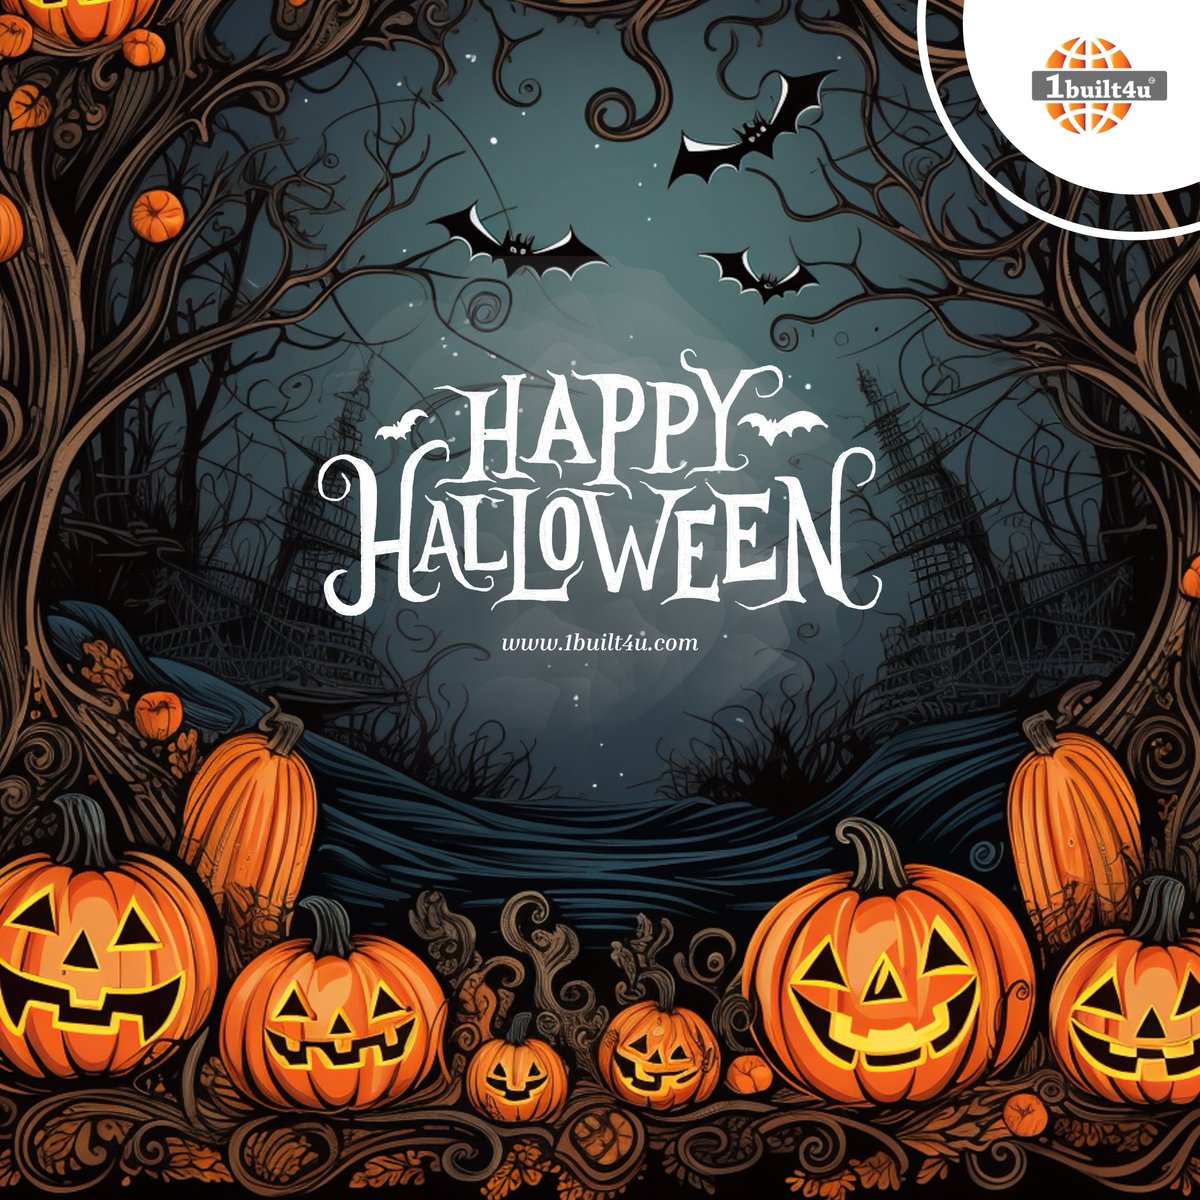 Wishing you a spooktacular Halloween filled with laughter and treats! 🎃👻 

#1built4udotcom
#1built4u
#HappyHalloween
#HalloweenFun
#TrickOrTreat
#HalloweenMagic
#SpookySeason
#HalloweenNight
#HalloweenVibes
#CostumeParty
#WitchyVibes
#GhoulishGathering
#CreepItReal